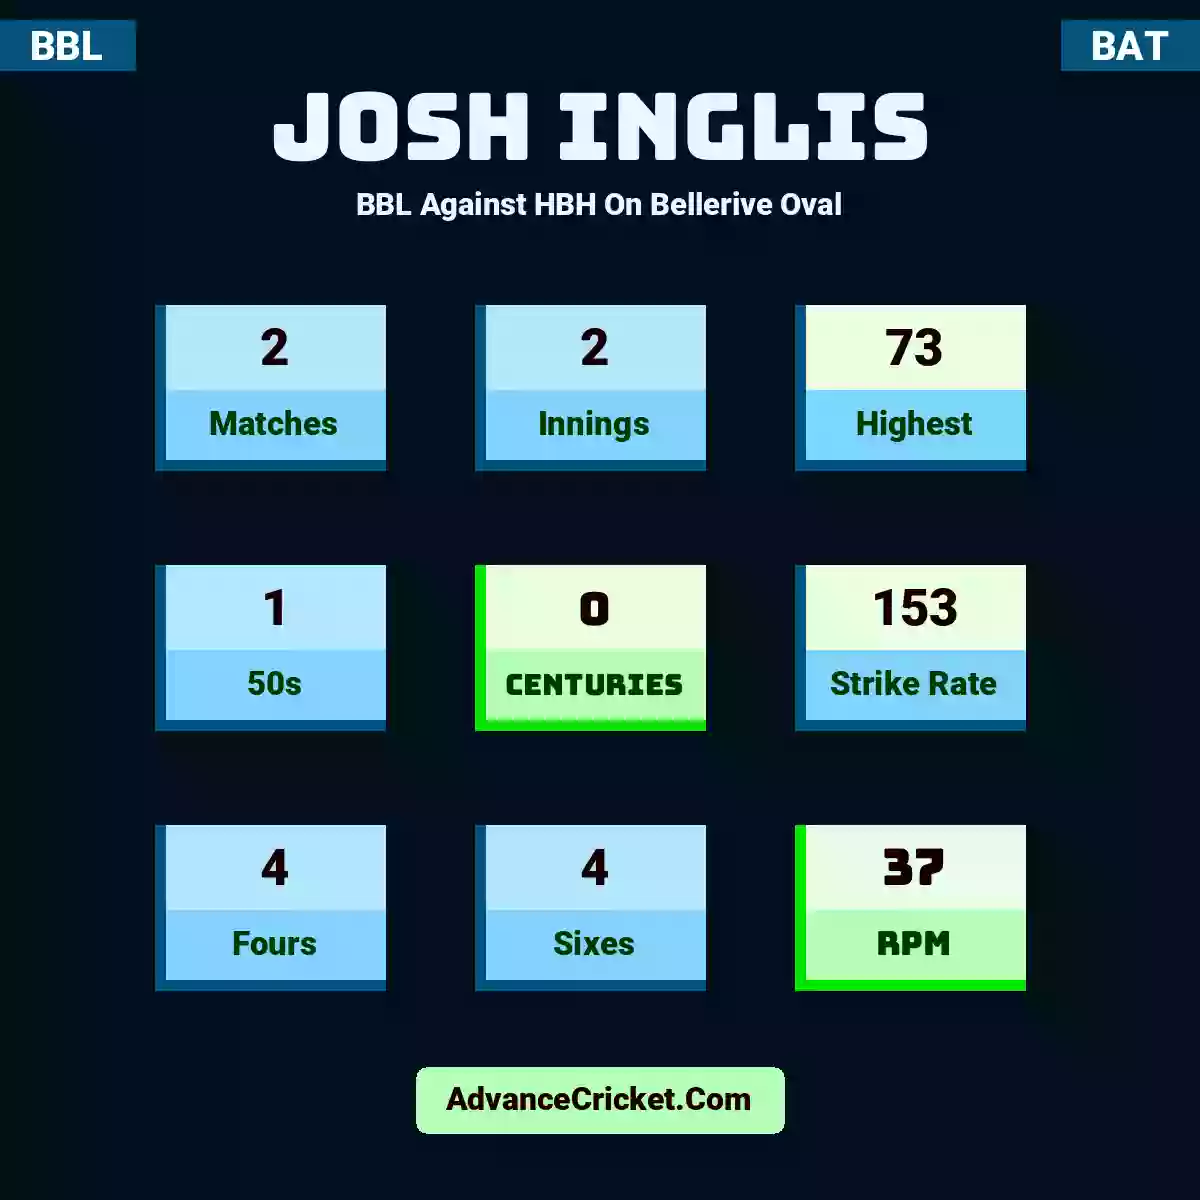 Josh Inglis BBL  Against HBH On Bellerive Oval, Josh Inglis played 2 matches, scored 73 runs as highest, 1 half-centuries, and 0 centuries, with a strike rate of 153. J.Inglis hit 4 fours and 4 sixes, with an RPM of 37.